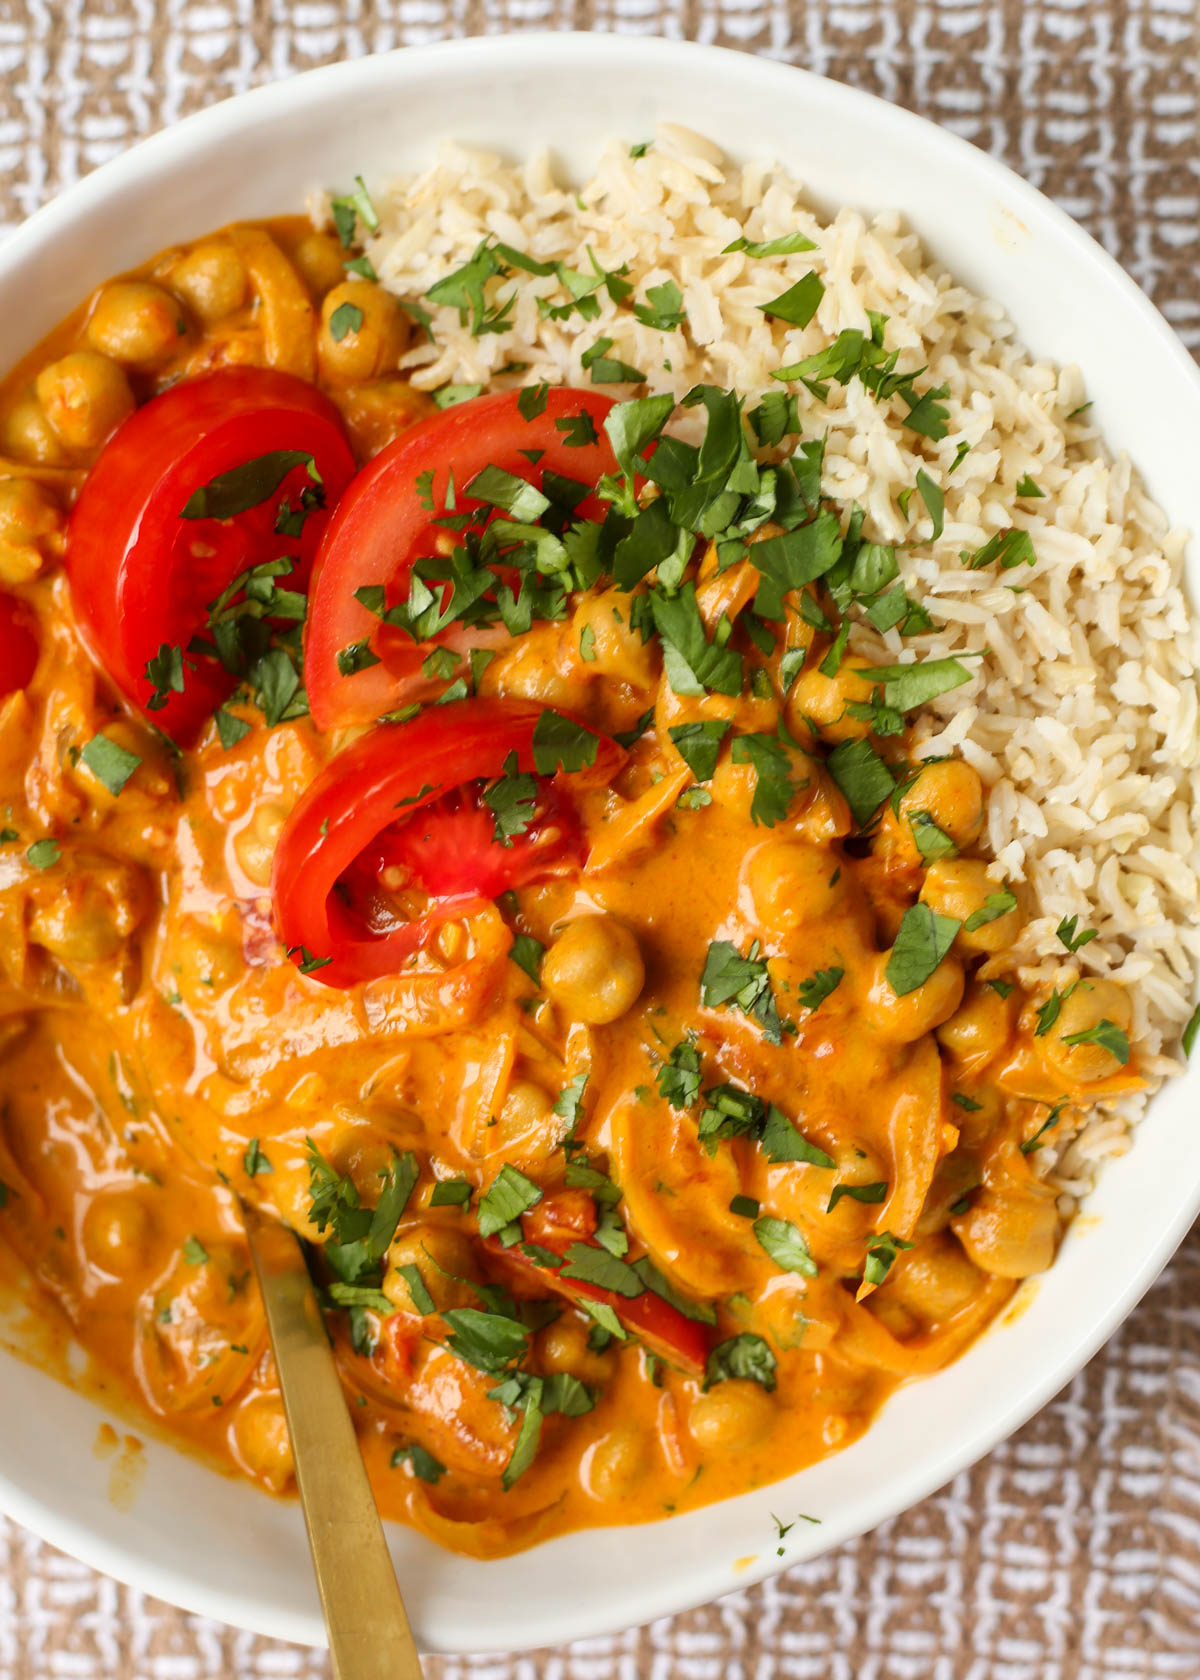 A bowl of tomato and chickpea curry with brown basmati rice